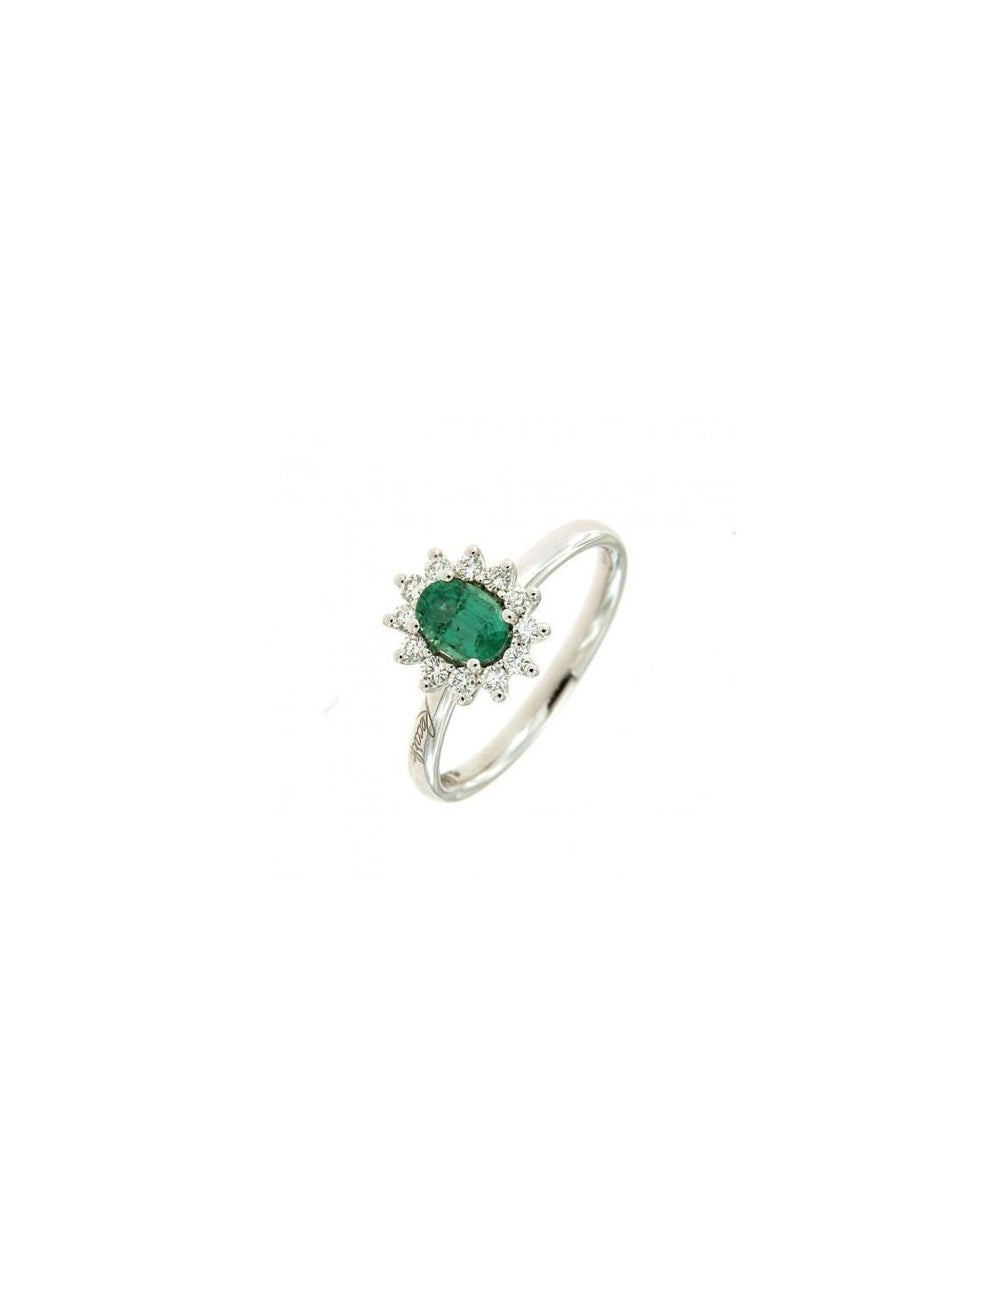 White gold ring with emerald and diamond ring, 0.77 ct of emeralds - R79CC123/SM020